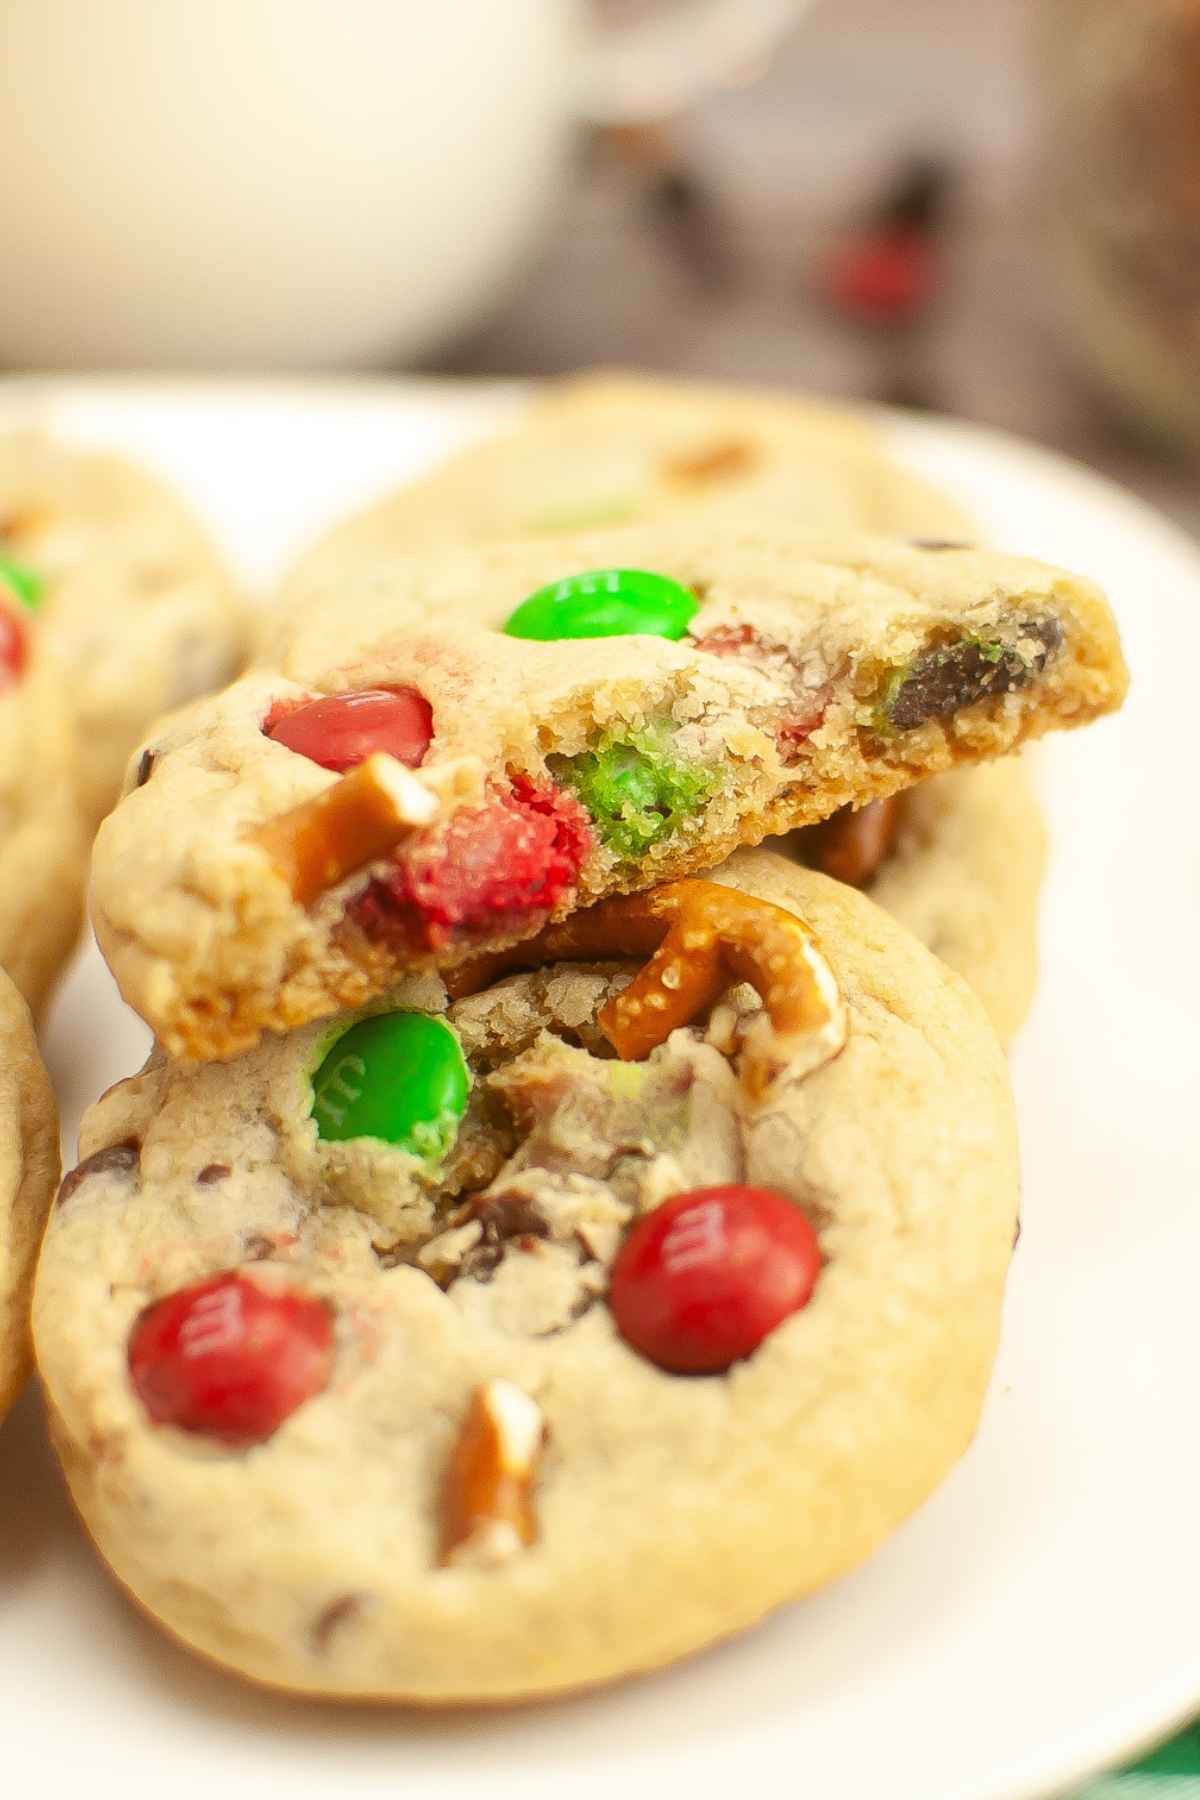 A stack of cookies with red and green chocolate coated candy, chocolate chips, and pretzels inside.